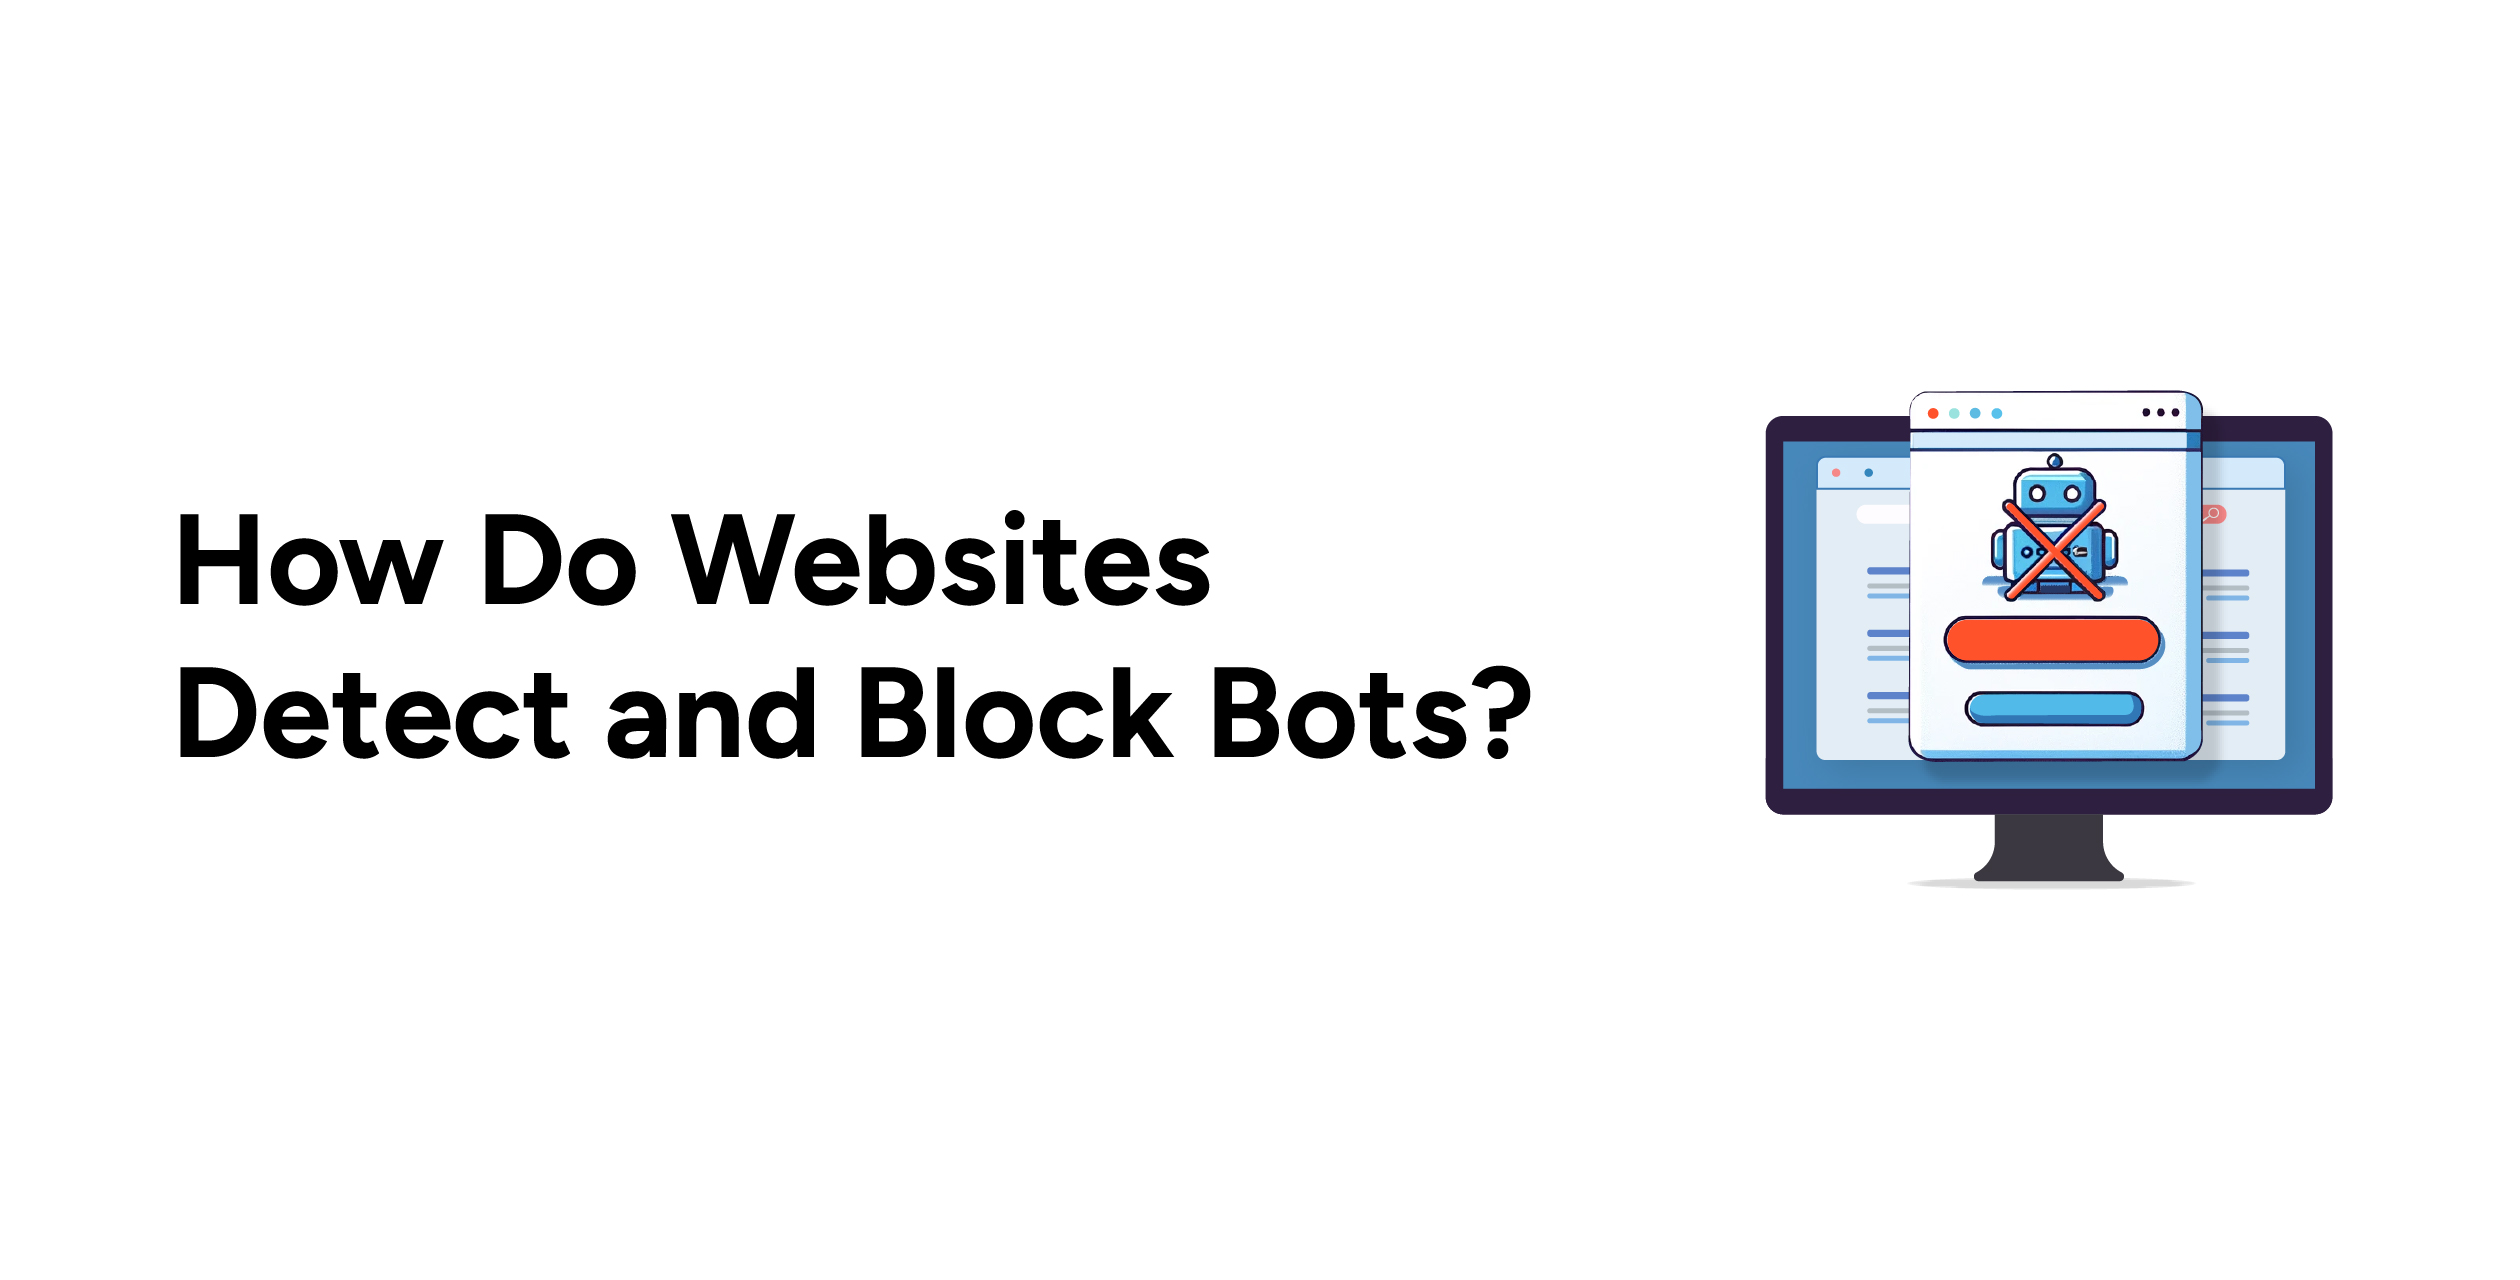 How do websites detect and block bots